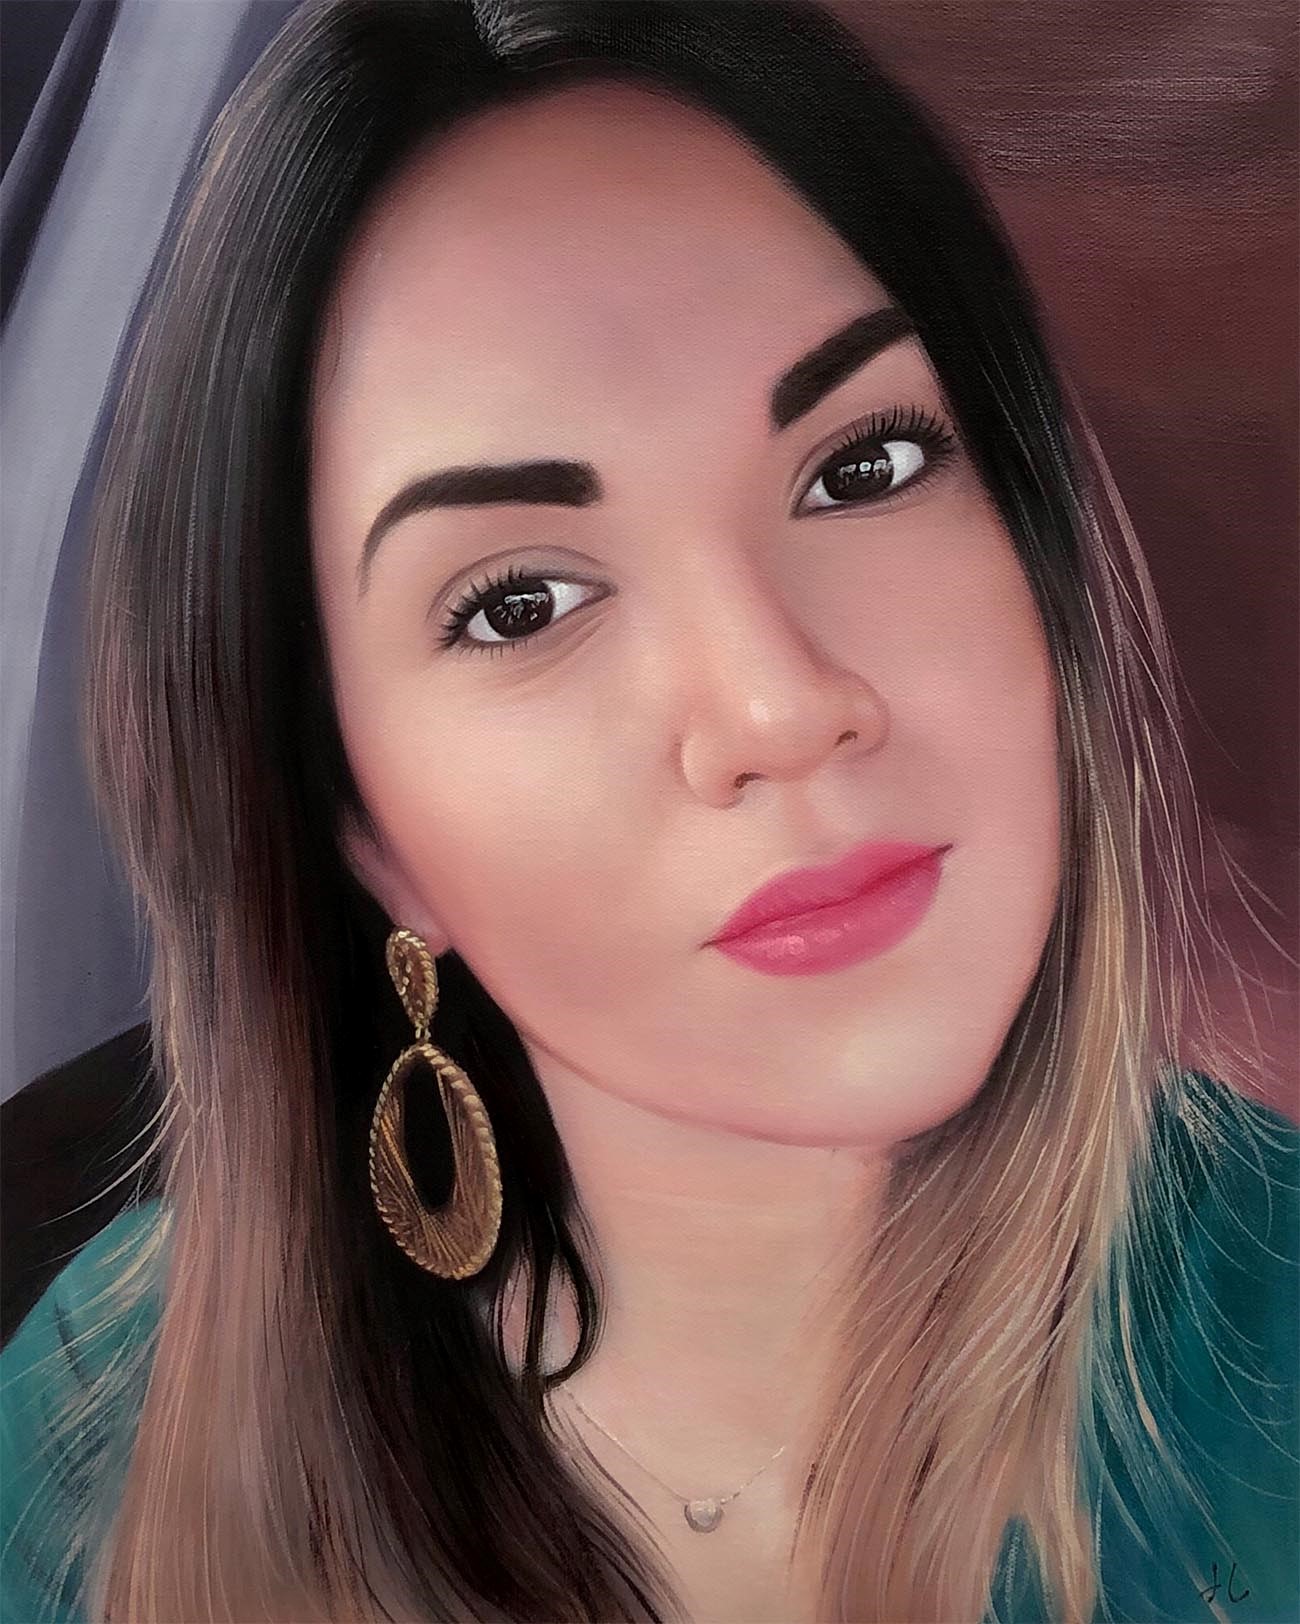 Individual portrait painting of a woman wearing a green shirt.